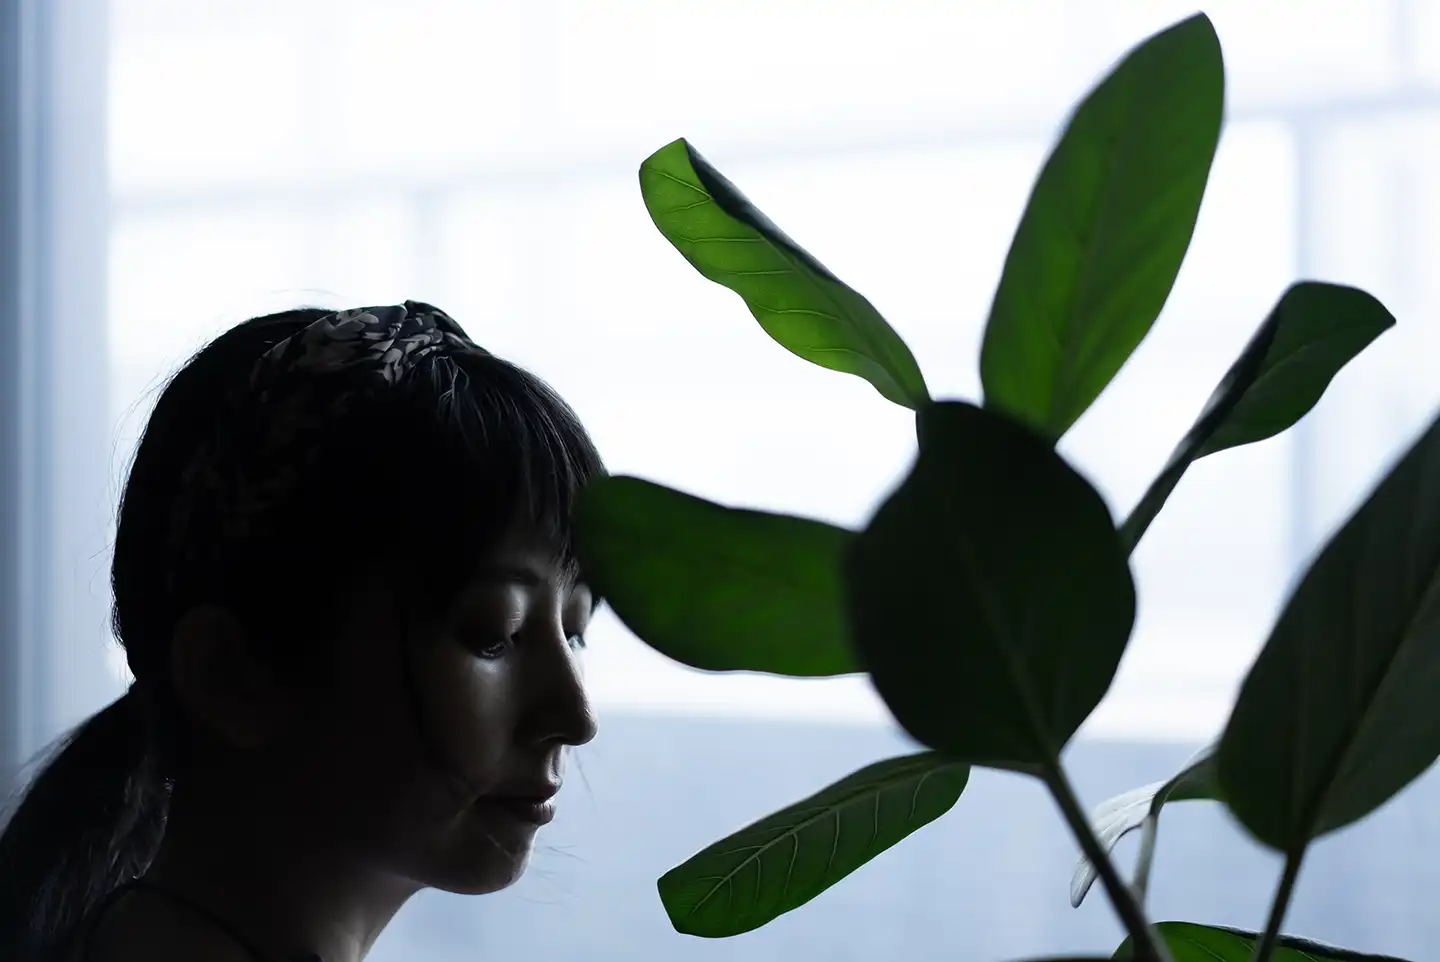 Woman finding solace in plants a.k.a horticultural therapy